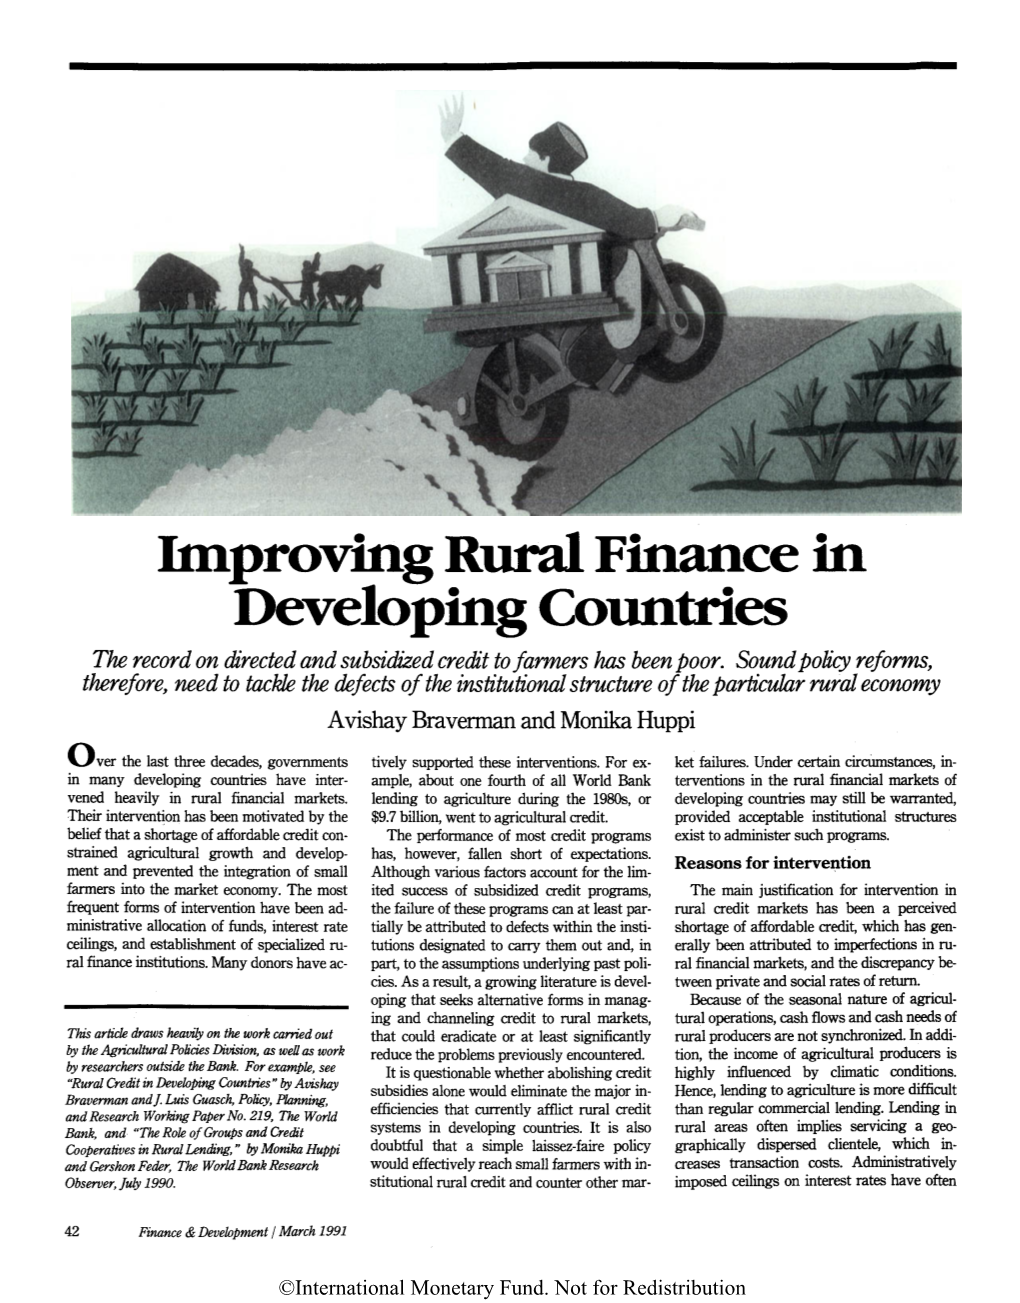 Developing Countries the Record on Directed and Subsidized Credit to Farmers Has Been Poor